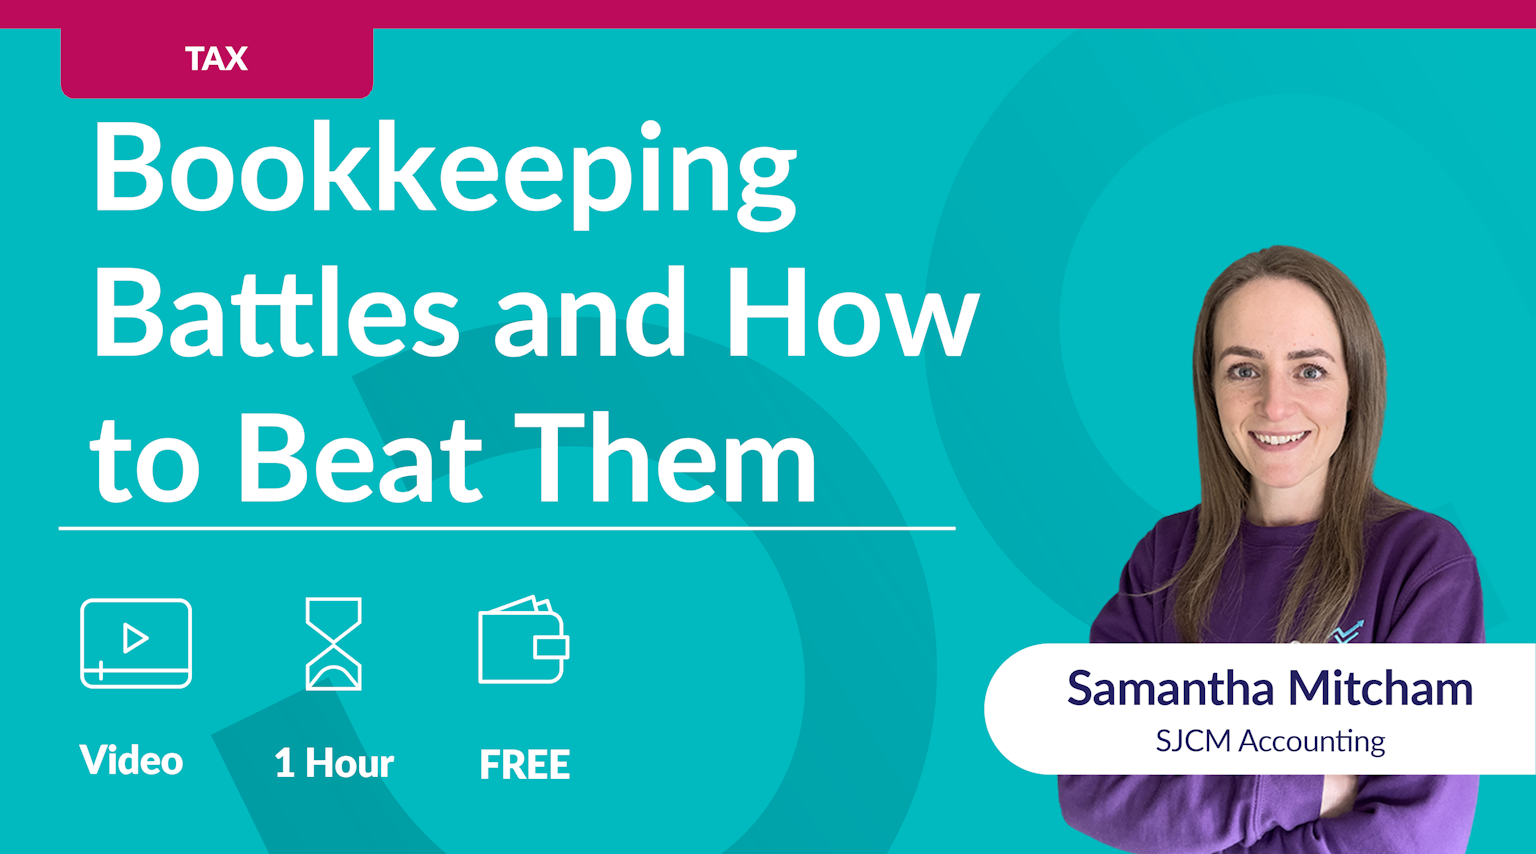 Bookkeeping Battles and How to Beat Them